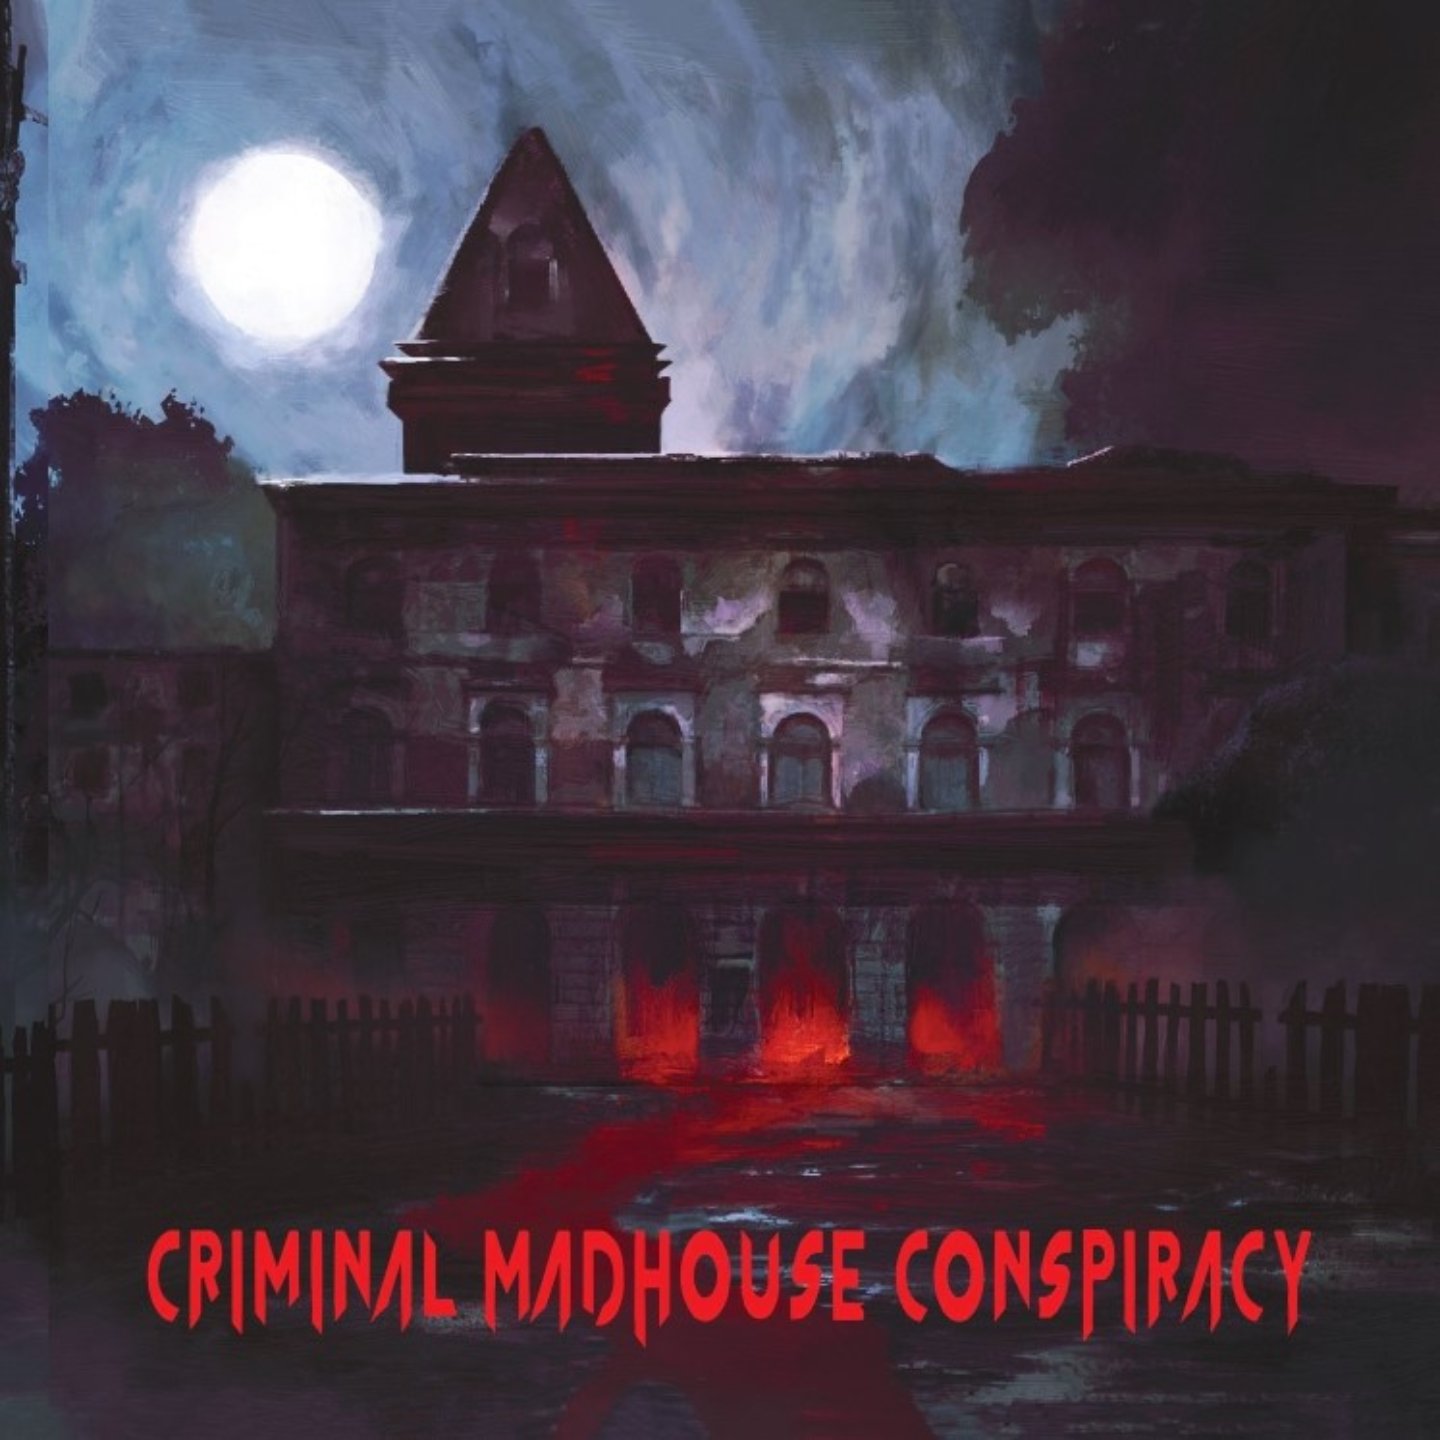 Criminal Madhouse Conspiracy – “Criminal Madhouse Conspiracy”